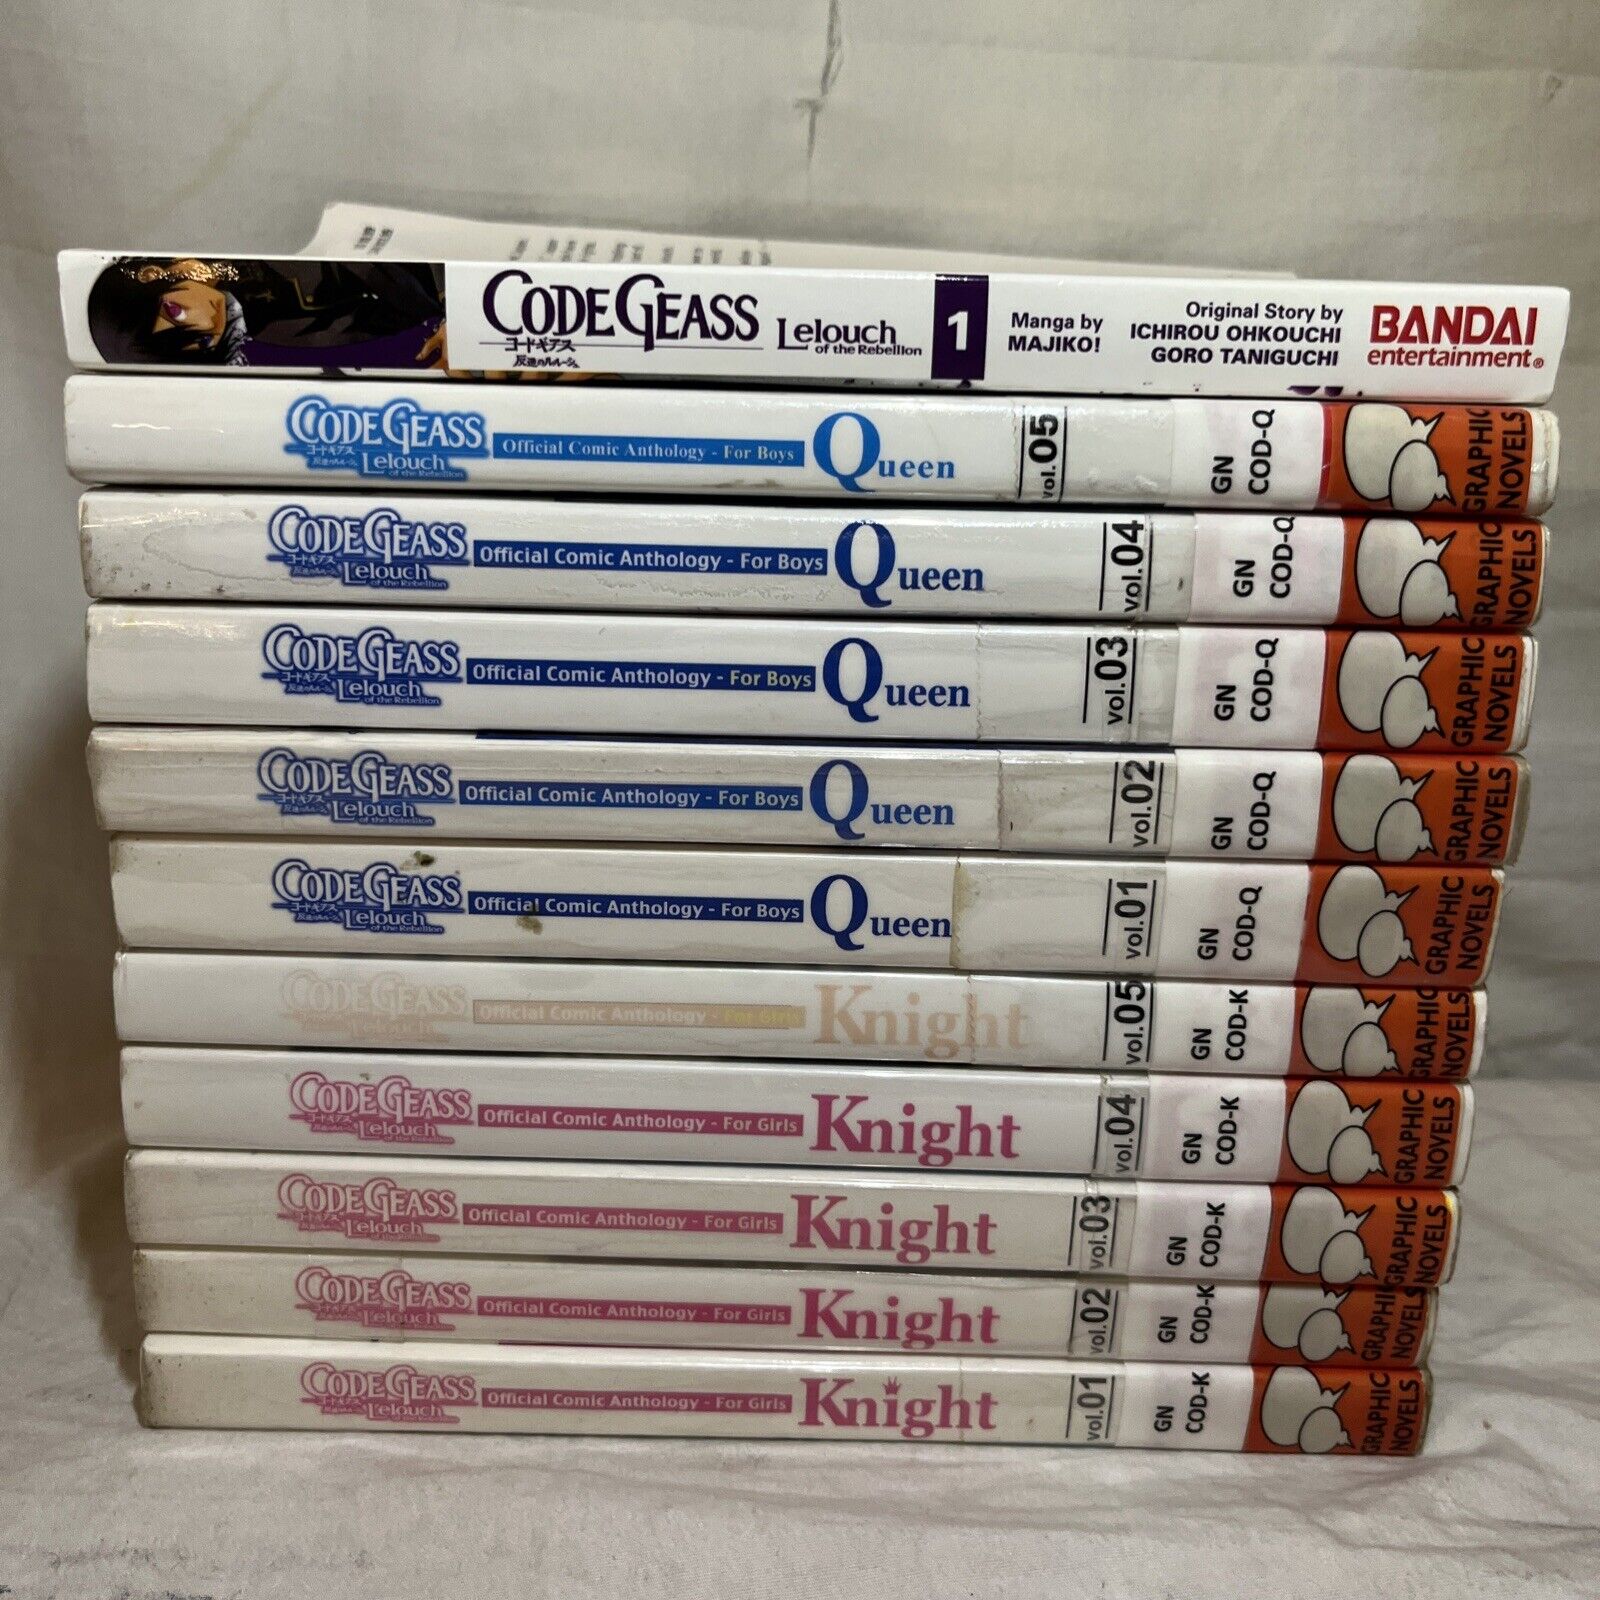 Code Geass Lelouch Knight Queen English Manga Volume Lot of 11 Rare OOP Complete